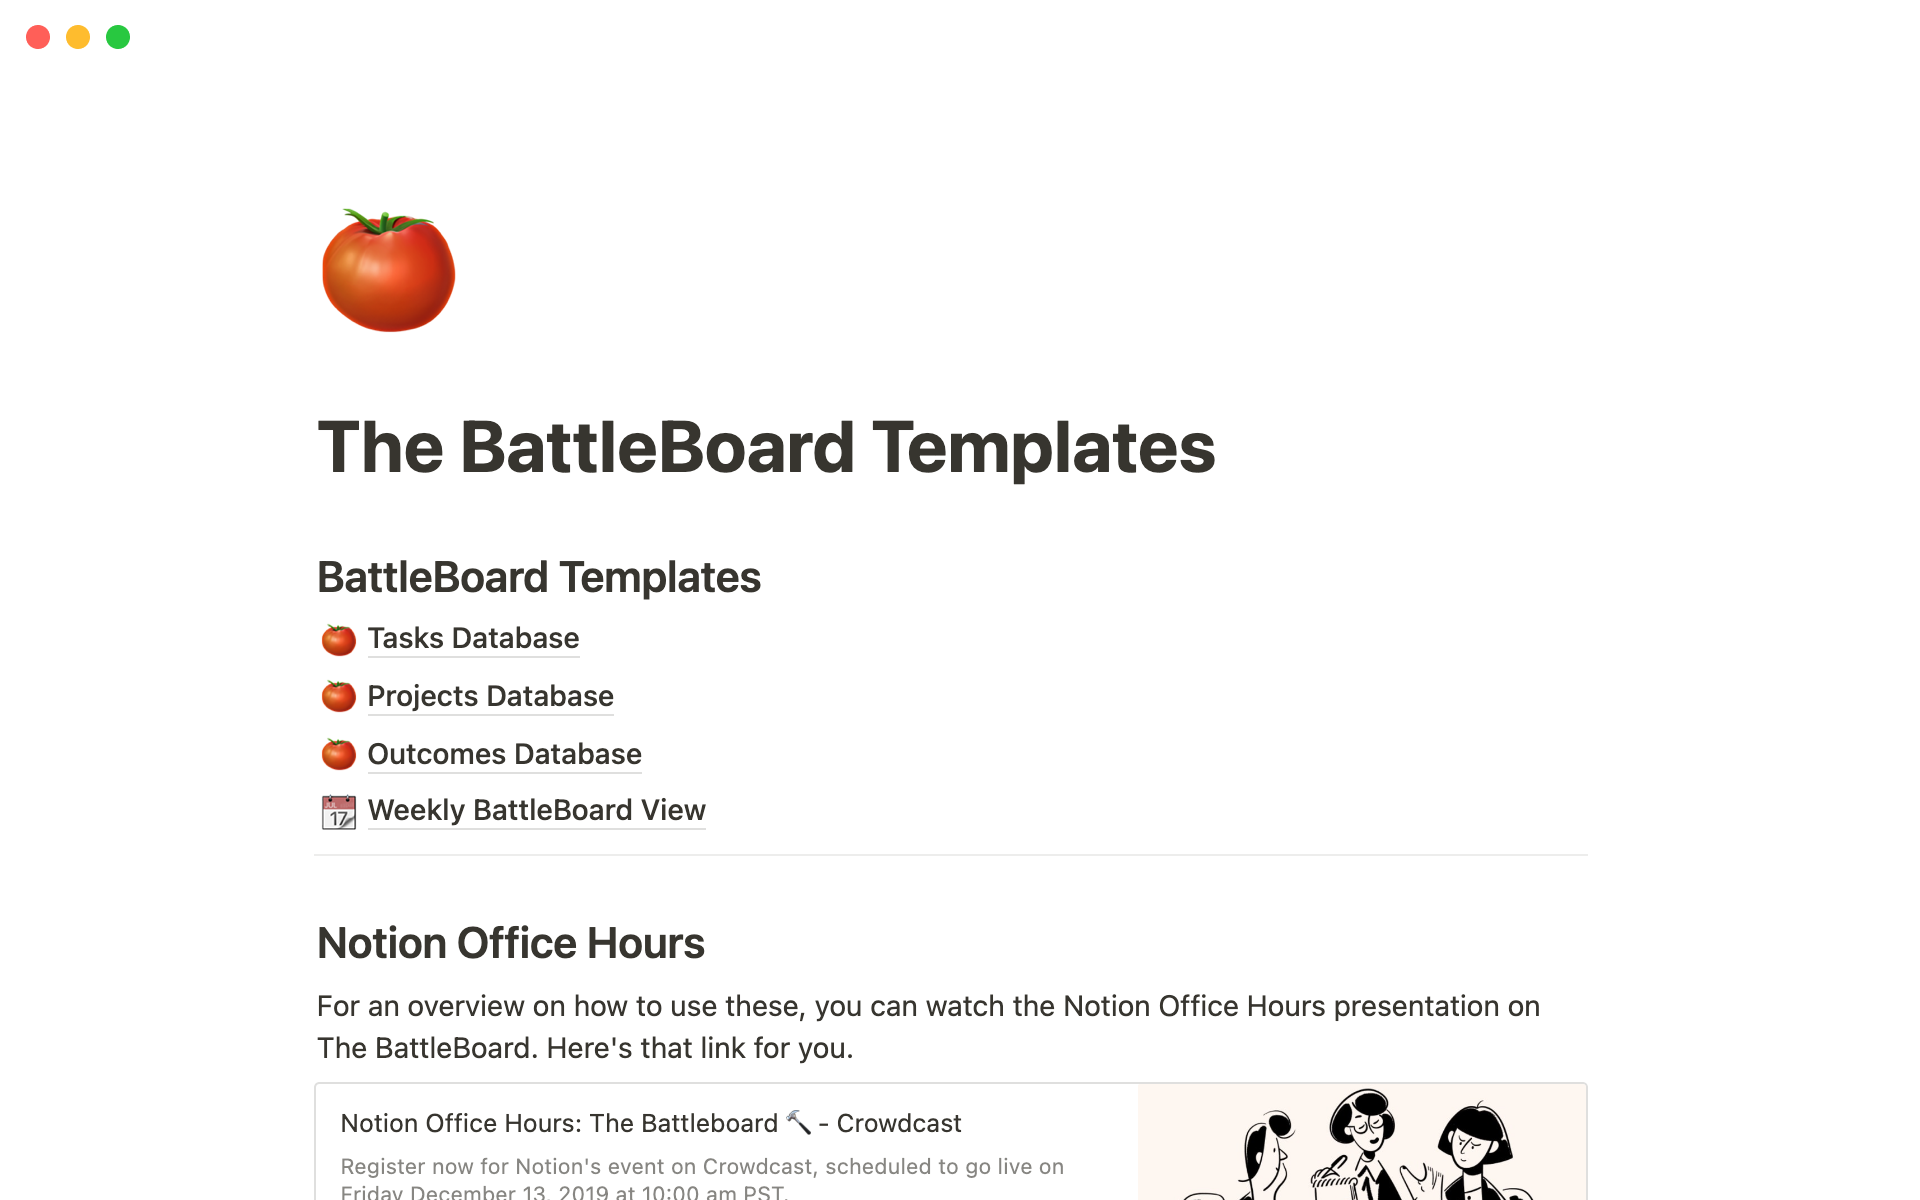 With these templates, you'll be able to manage your outcomes, projects, and tasks.